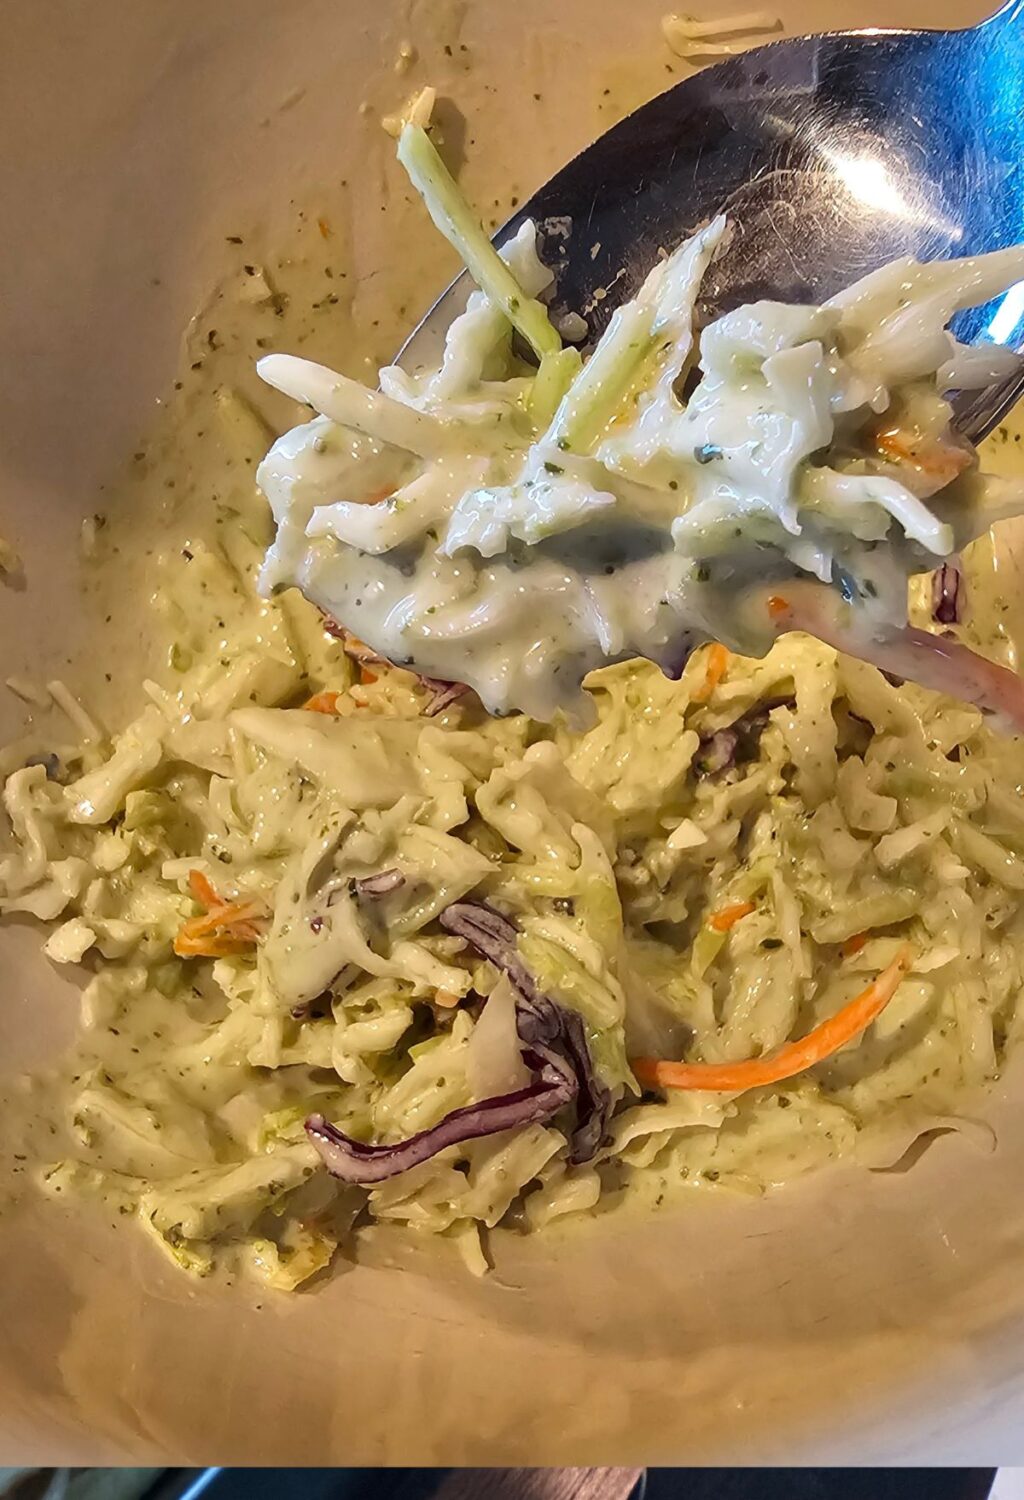 A bowl of coleslaw with a spoon in it.